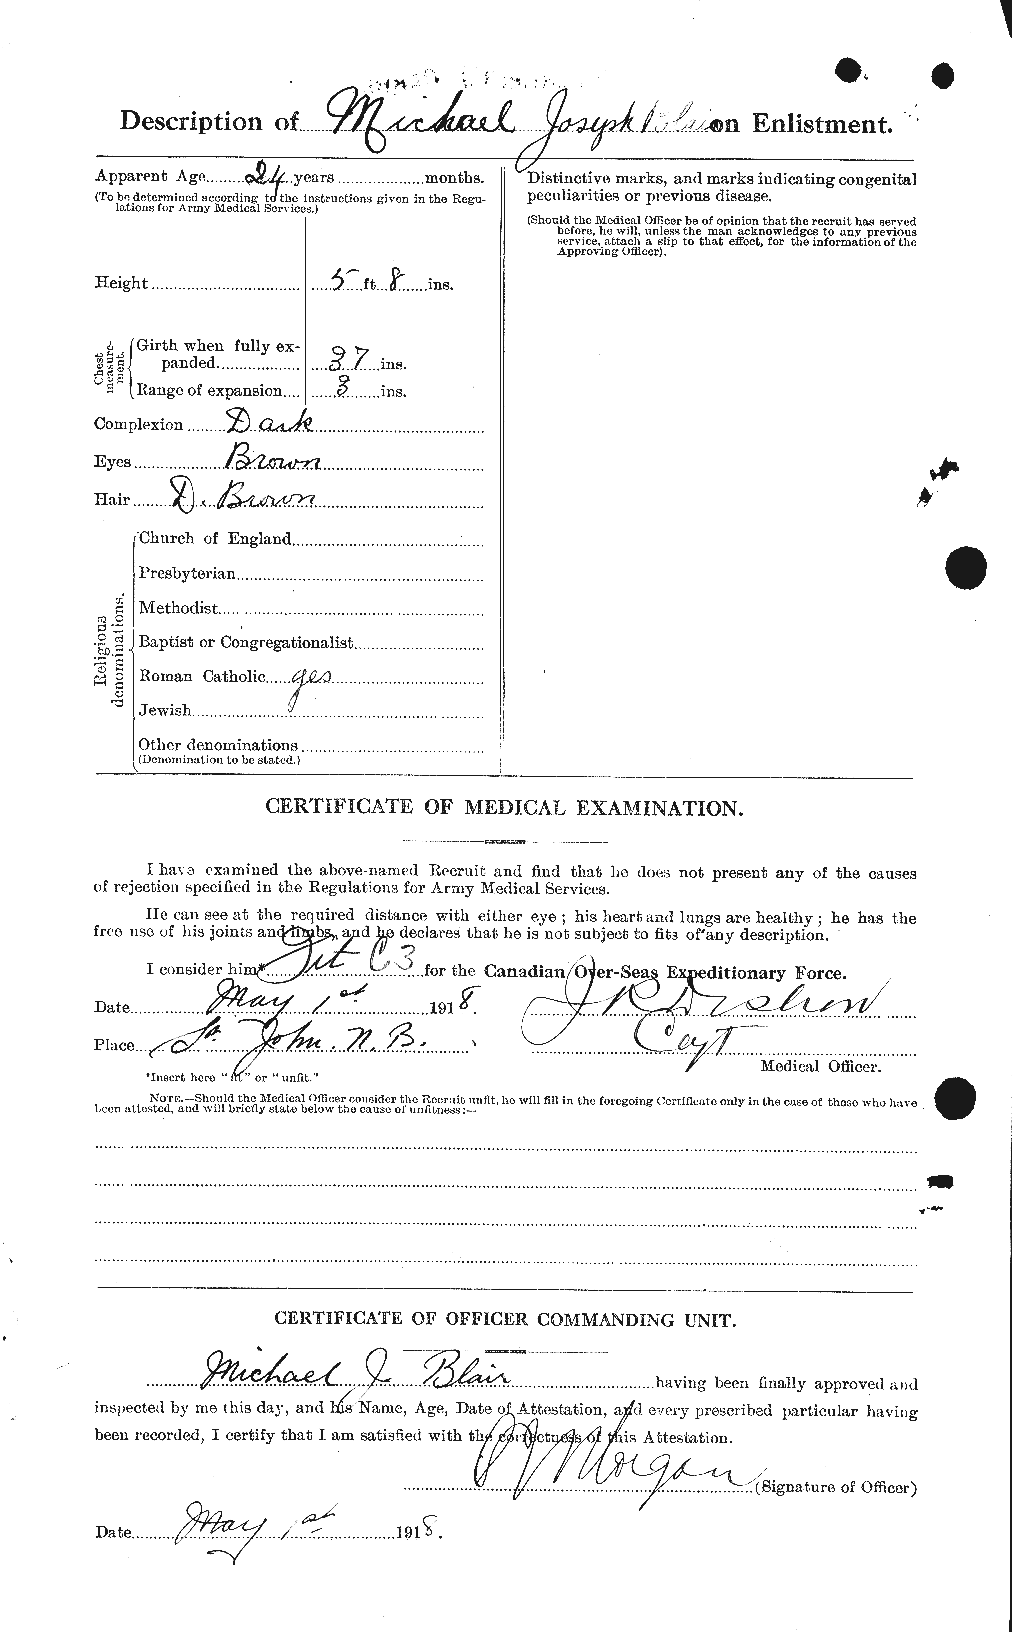 Personnel Records of the First World War - CEF 243119b